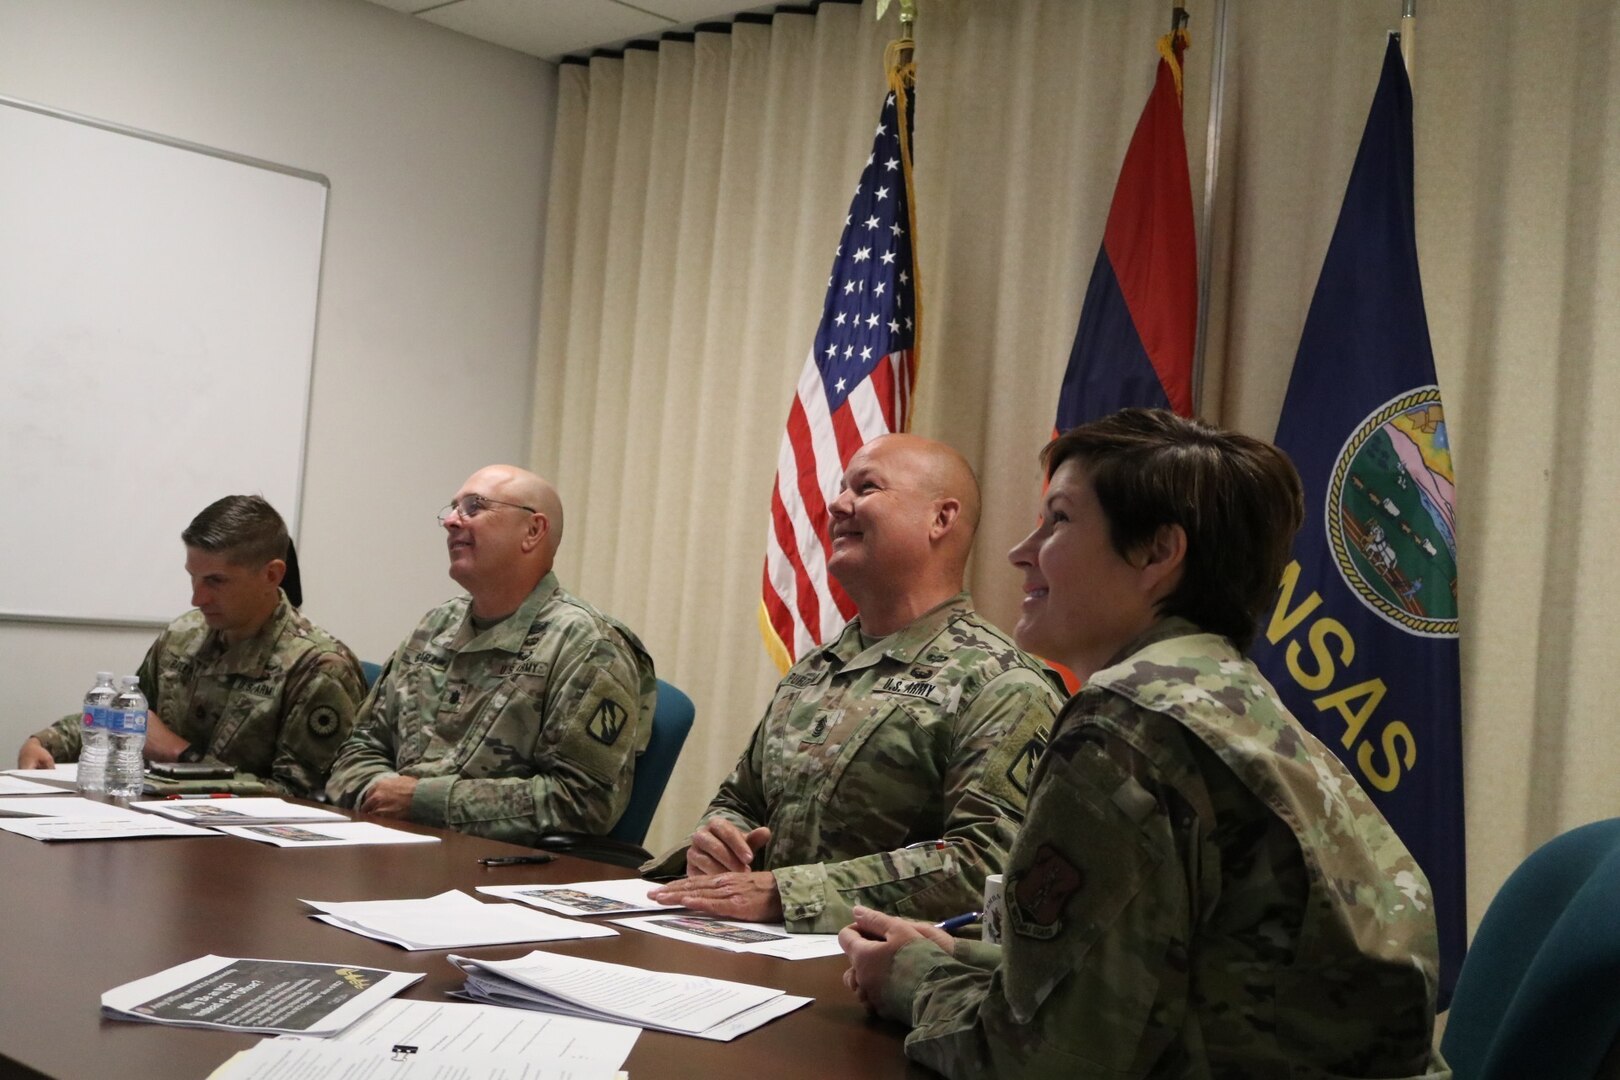 The command team from 2nd Combined Arms Battalion, 137th Infantry Regiment, including Lt. Col. Rodney Seaba, battalion commander, center left, and Command Sgt. Maj. Paul Purdham, battalion command sergeant major, center right, joined Sgt. 1st Class Gabriel Bailey, International Affairs Operations noncommissioned officer, left, and Maj. Marci Solander, Kansas National Guard State Partnership Program director, right, in a virtual SPP exchange Sept. 8-10 with students attending the Senior Leaders Course in the Republic of Armenia. The course was conducted at the Armenian Ministry of Defense’s National Defense Research University, the Armenian equivalent of the U.S. Army War College.